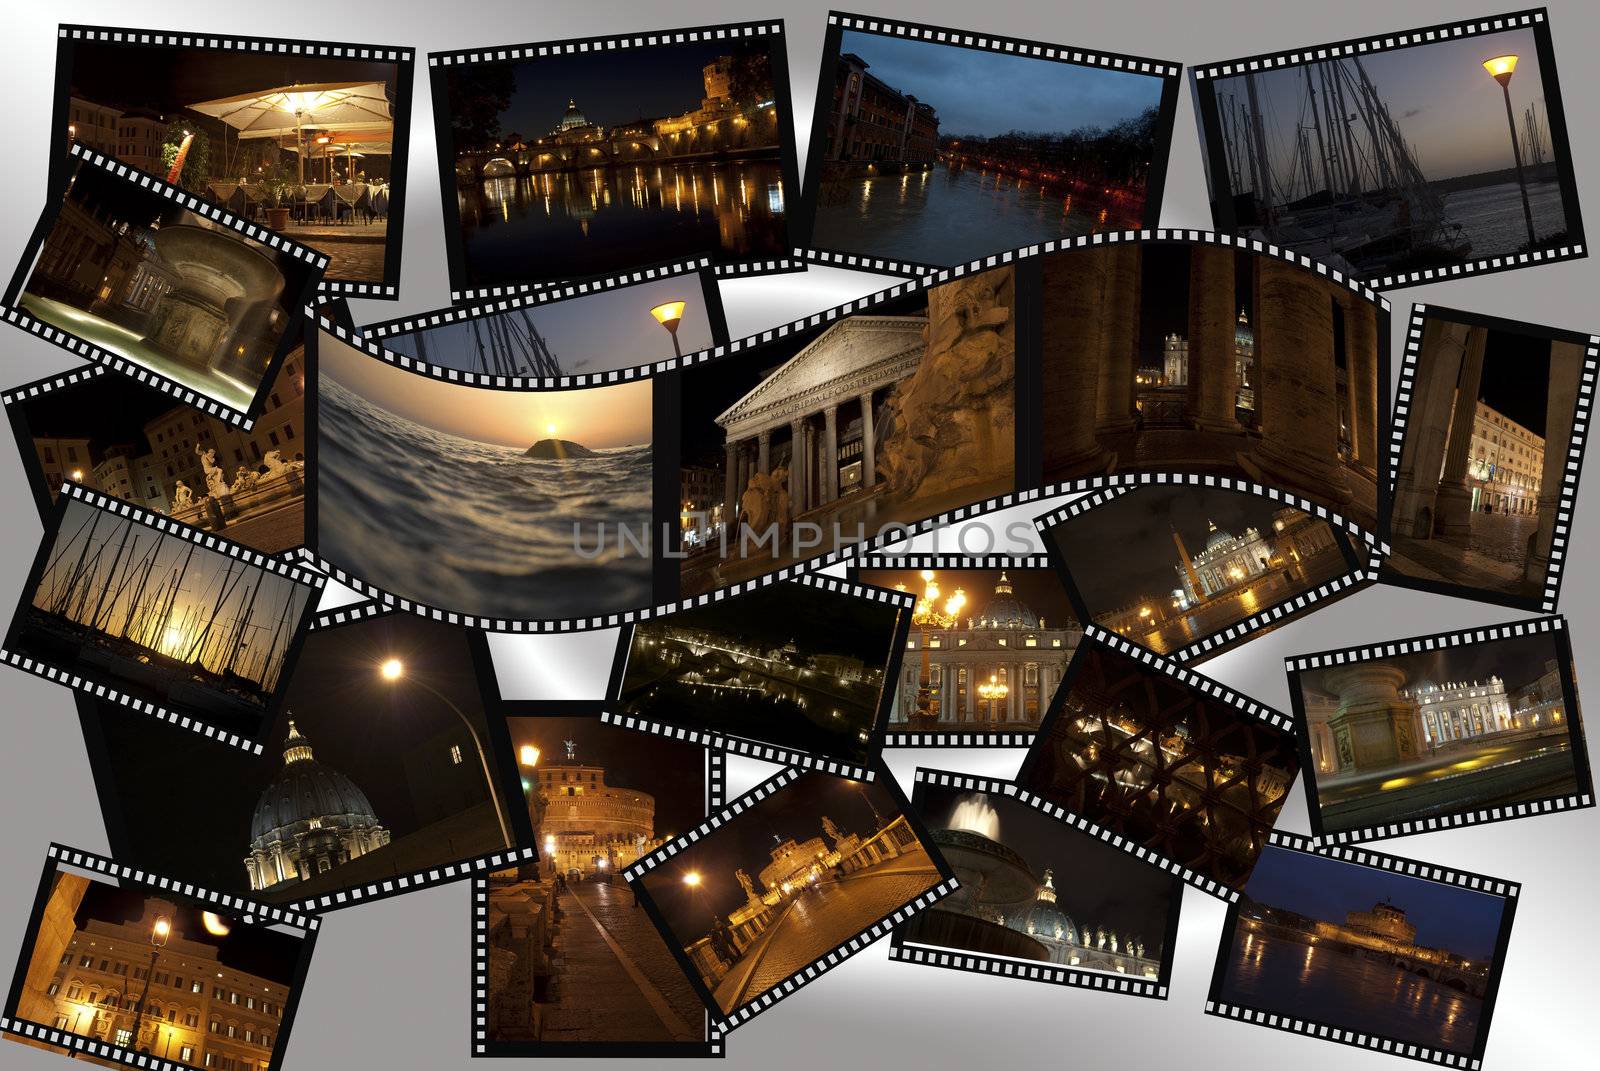 Rome by night. A photocollage of the city by night